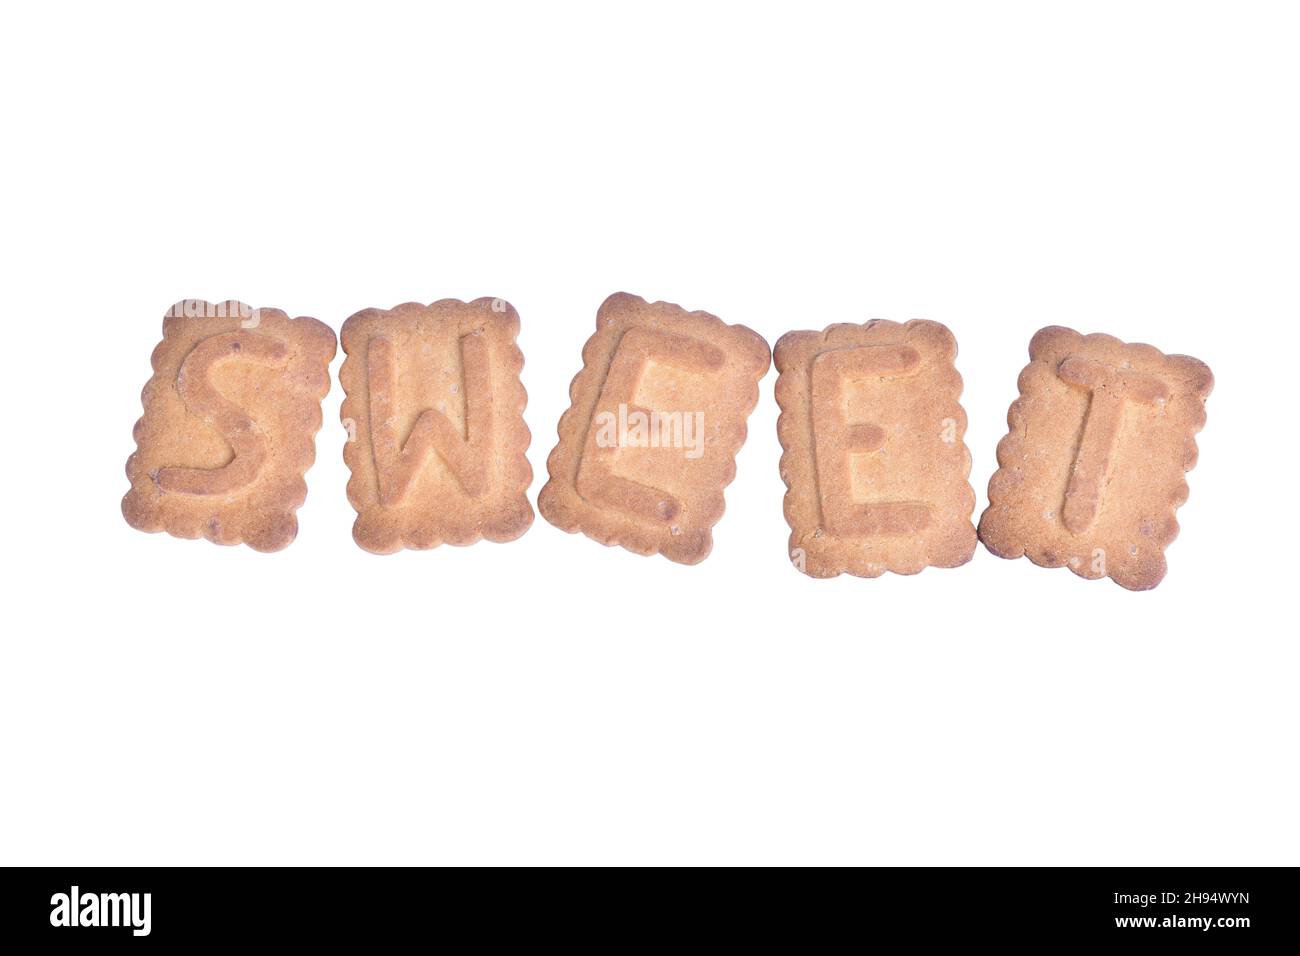 On white clipping background word SWEET laid out from cookies in center of frame Stock Photo